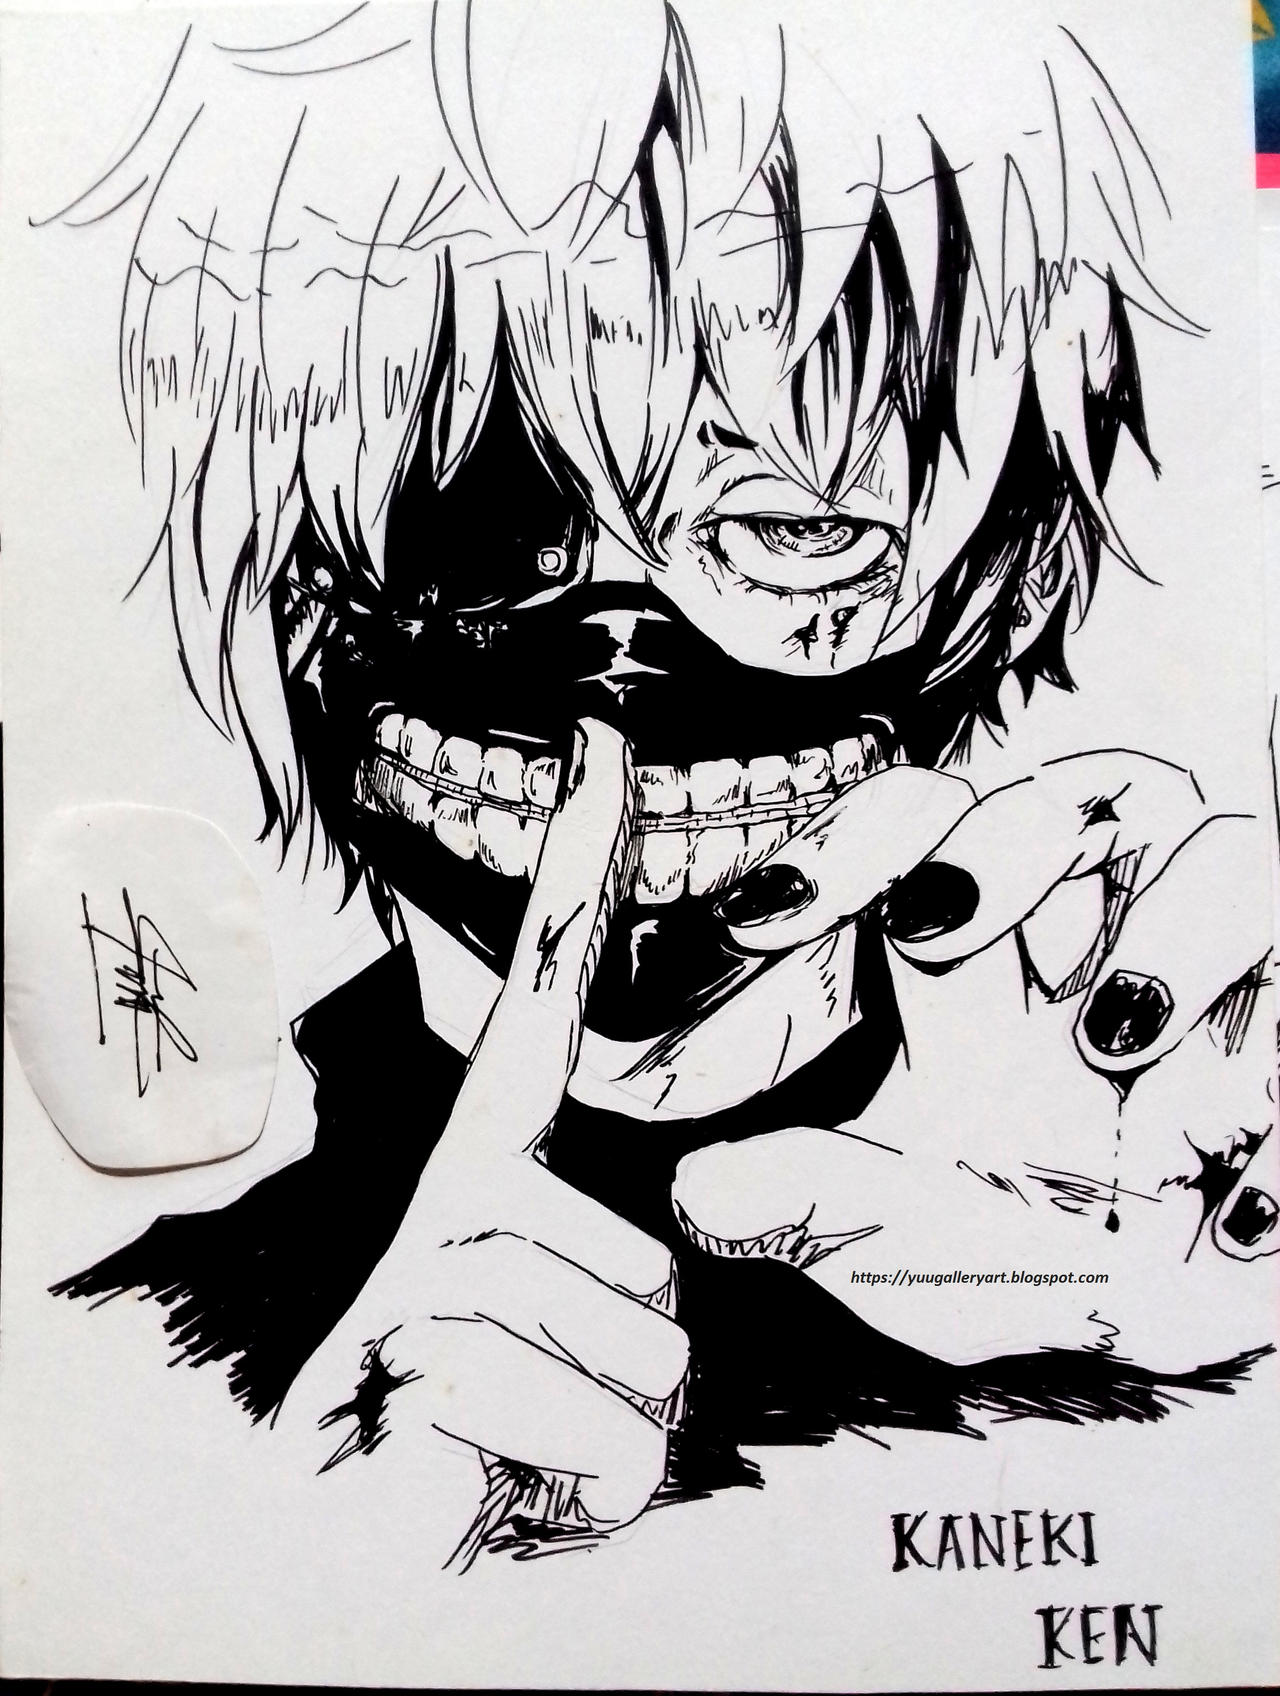 Anime Drawing - Tokyo Ghoul by YuLicht on DeviantArt